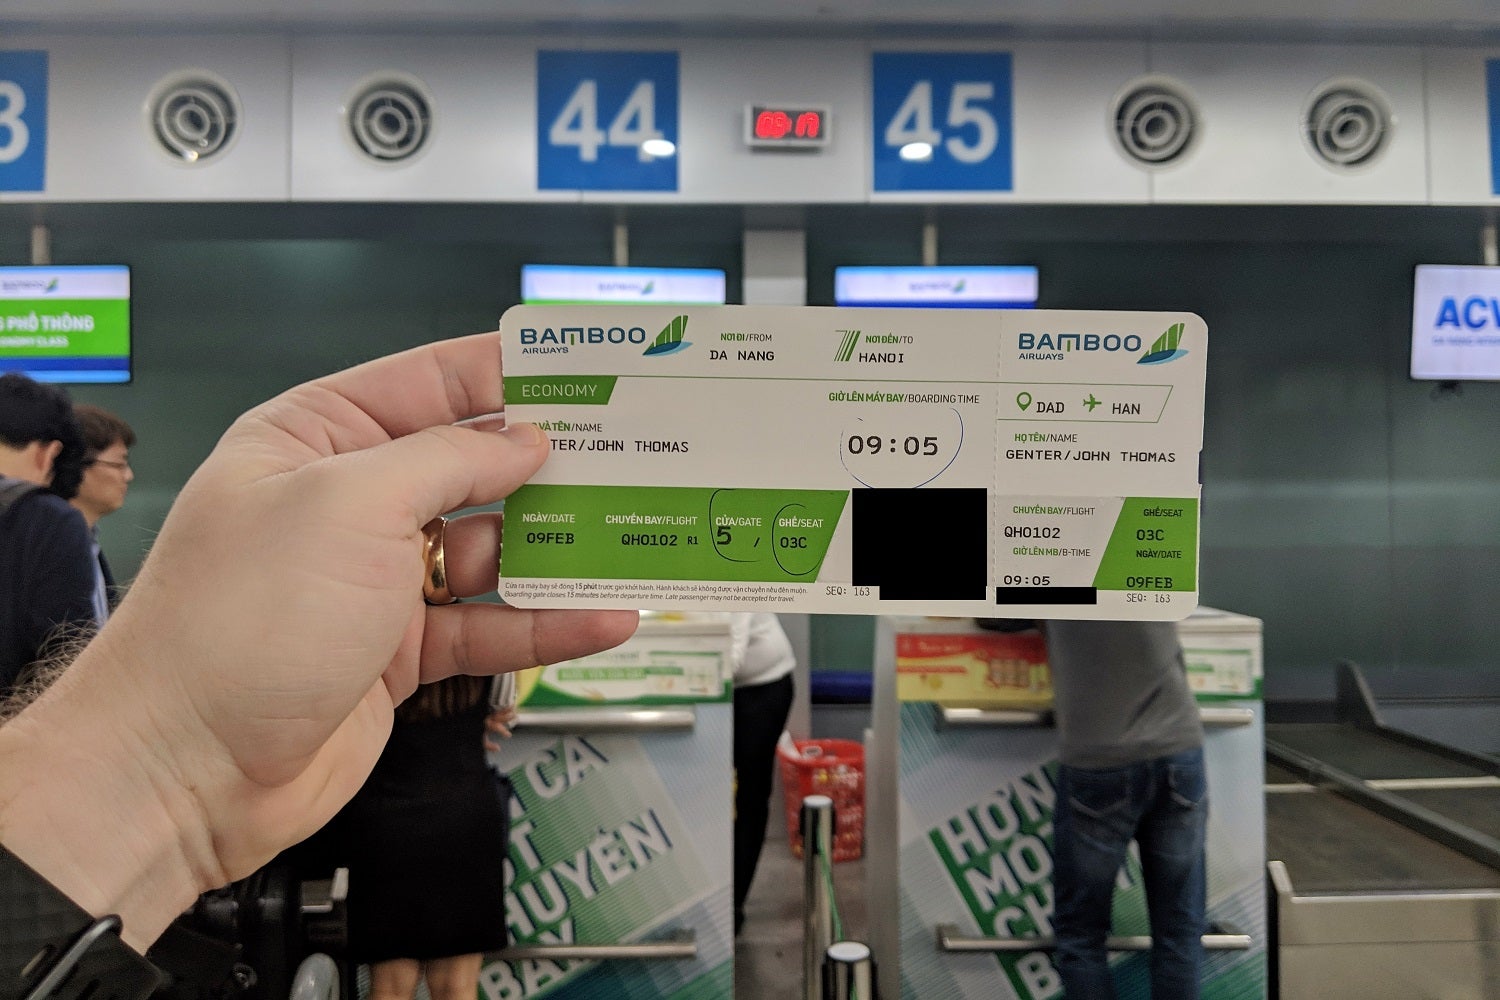 What It's Like on Vietnam's Newest Airline: Bamboo Airways